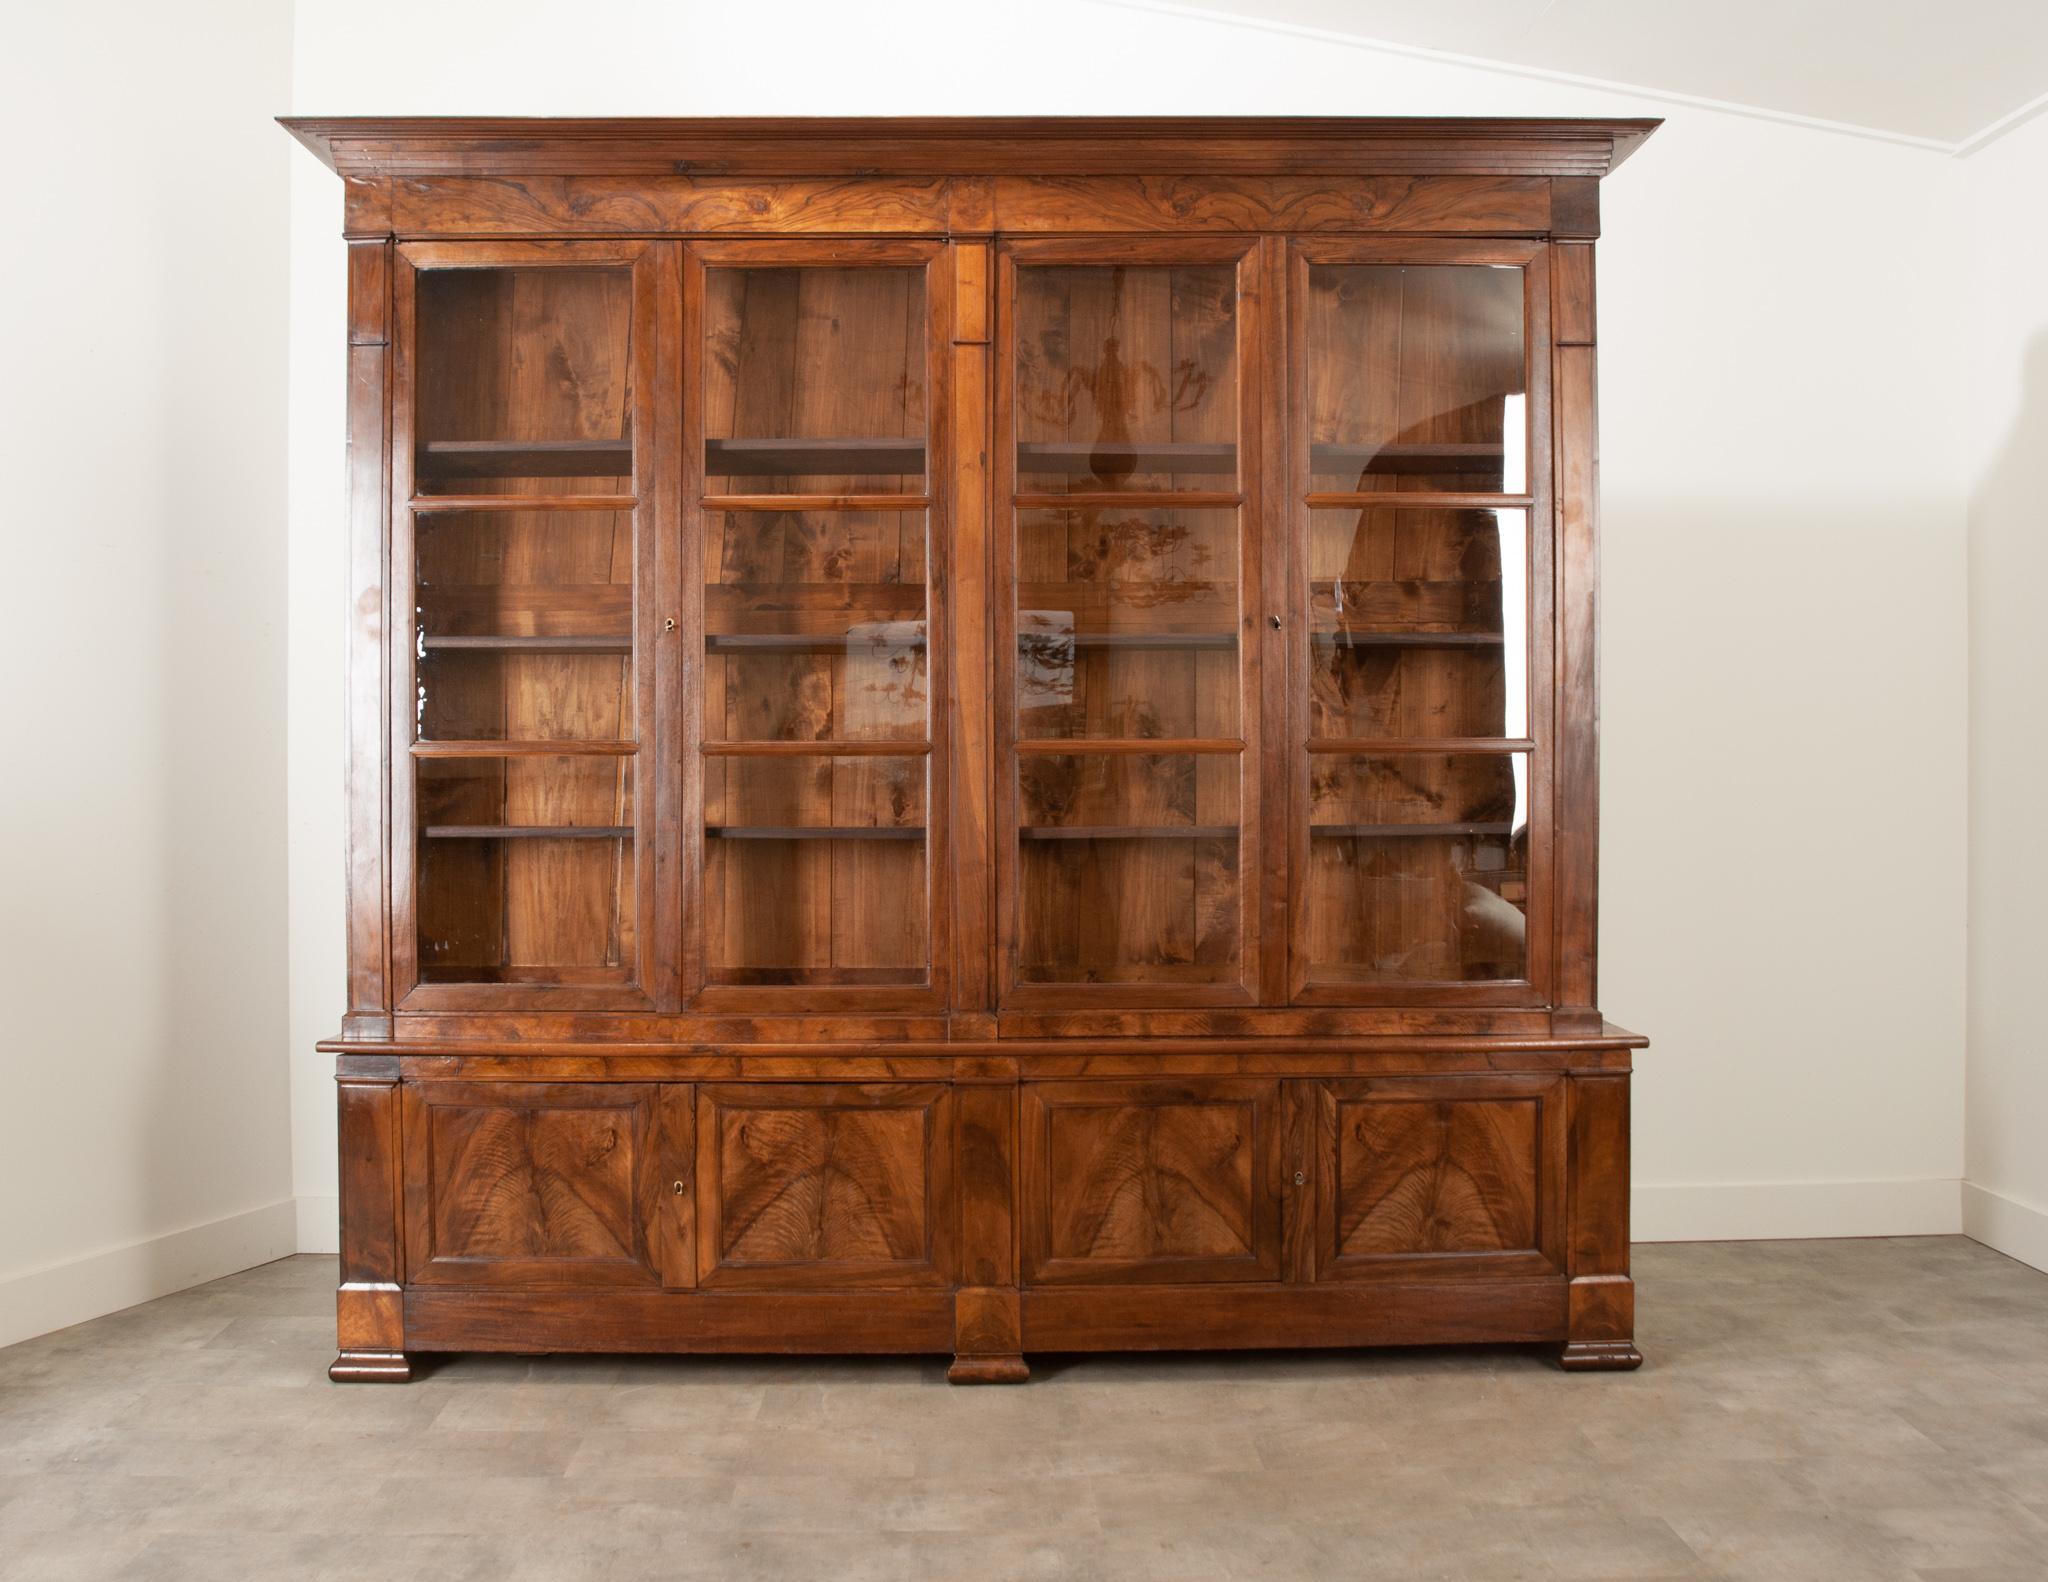 This large Louis Philippe bibliotheque is a magnificent way to display or store any precious decor items in your home or office. Unlocking the four glass front doors reveals a single interior cavity with three dovetail adjustable shelves. The lower